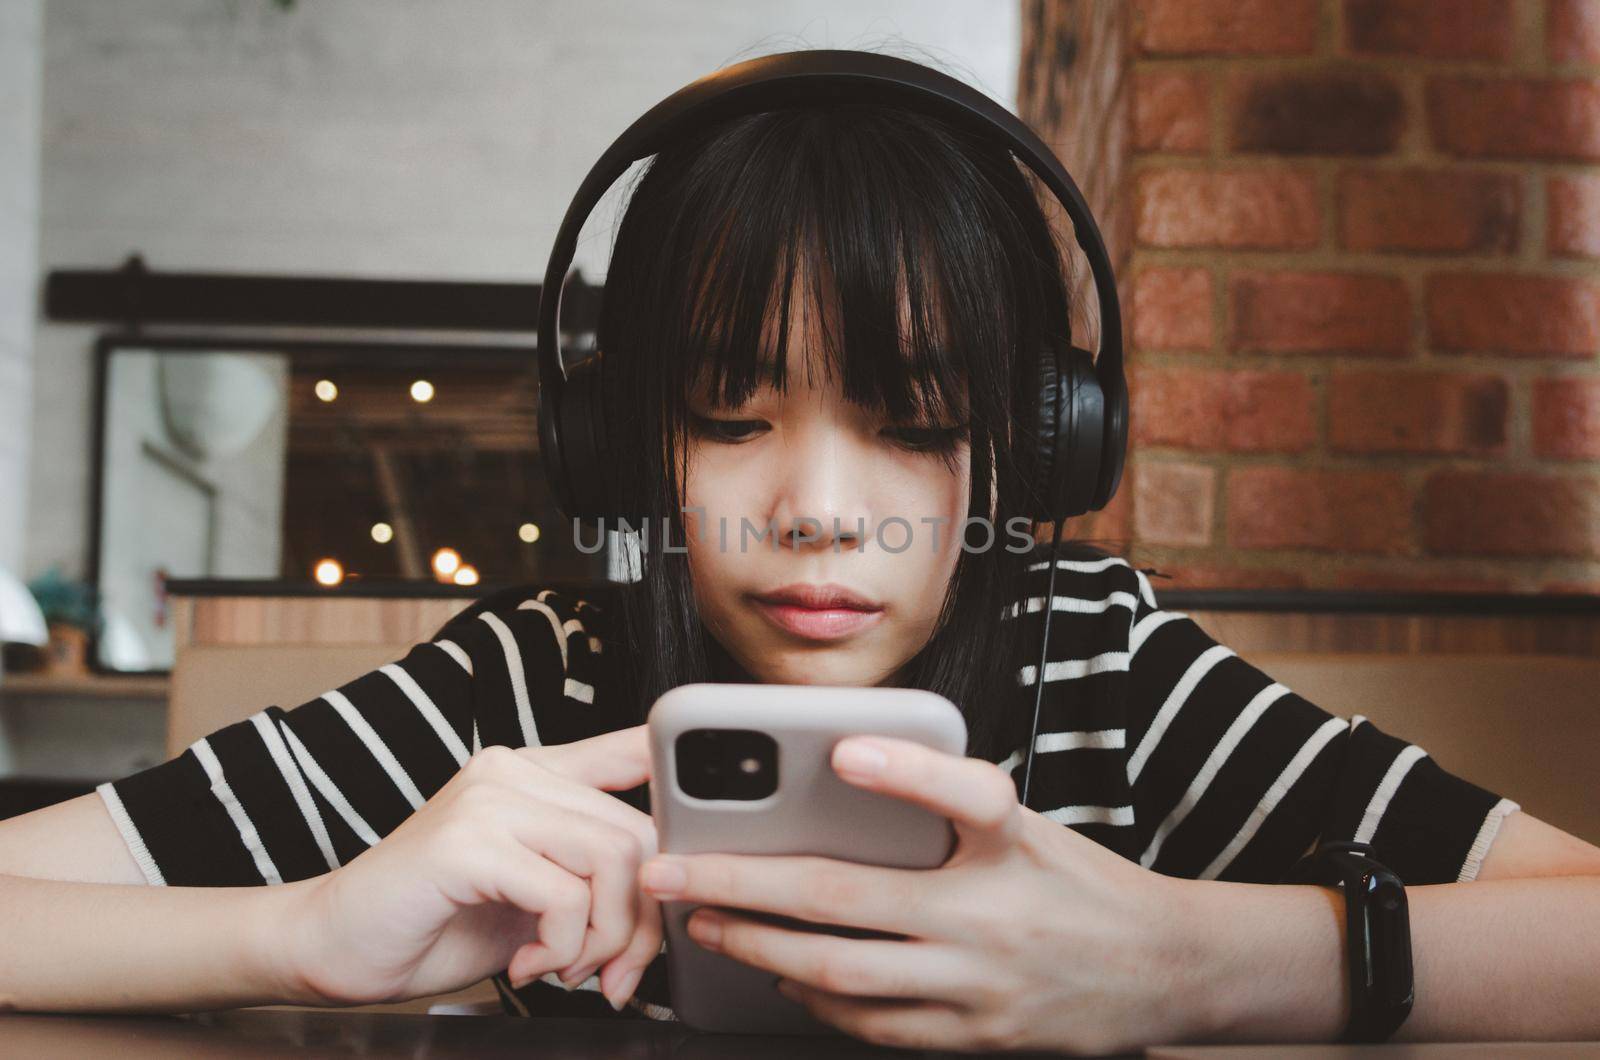 Teenage girl wearing headphones and holding a cell phone smartphone social media relaxing on the sofa.